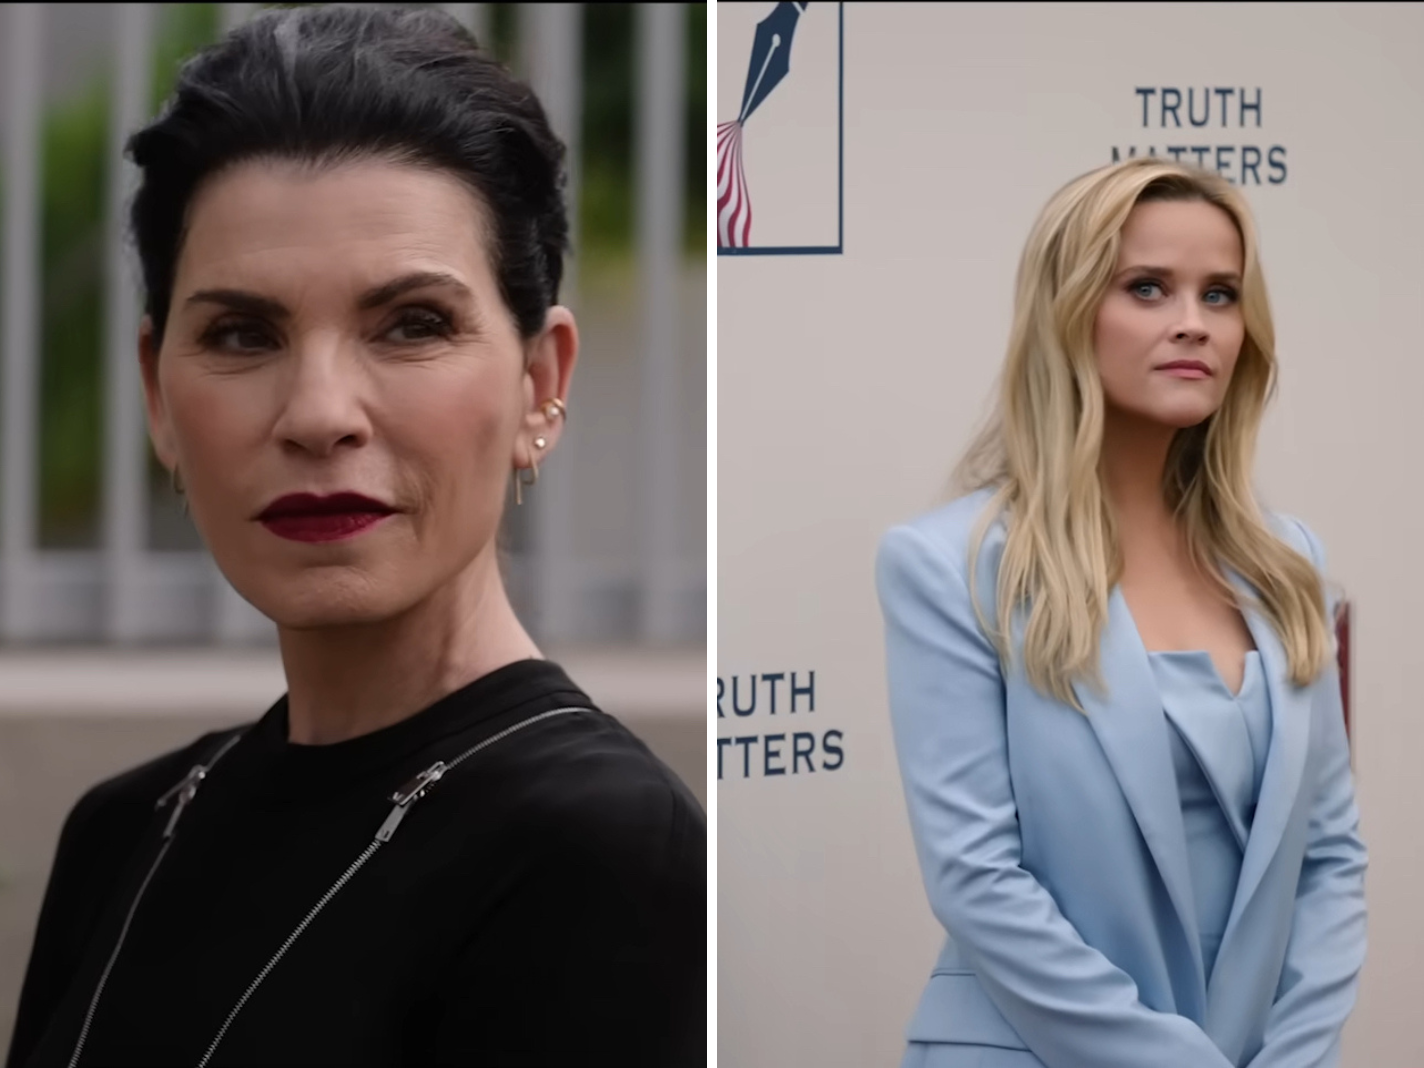 The Morning Show season 3 teaser trailer julianna margulies as laura peterson and reese witherspoon as bradley jackson